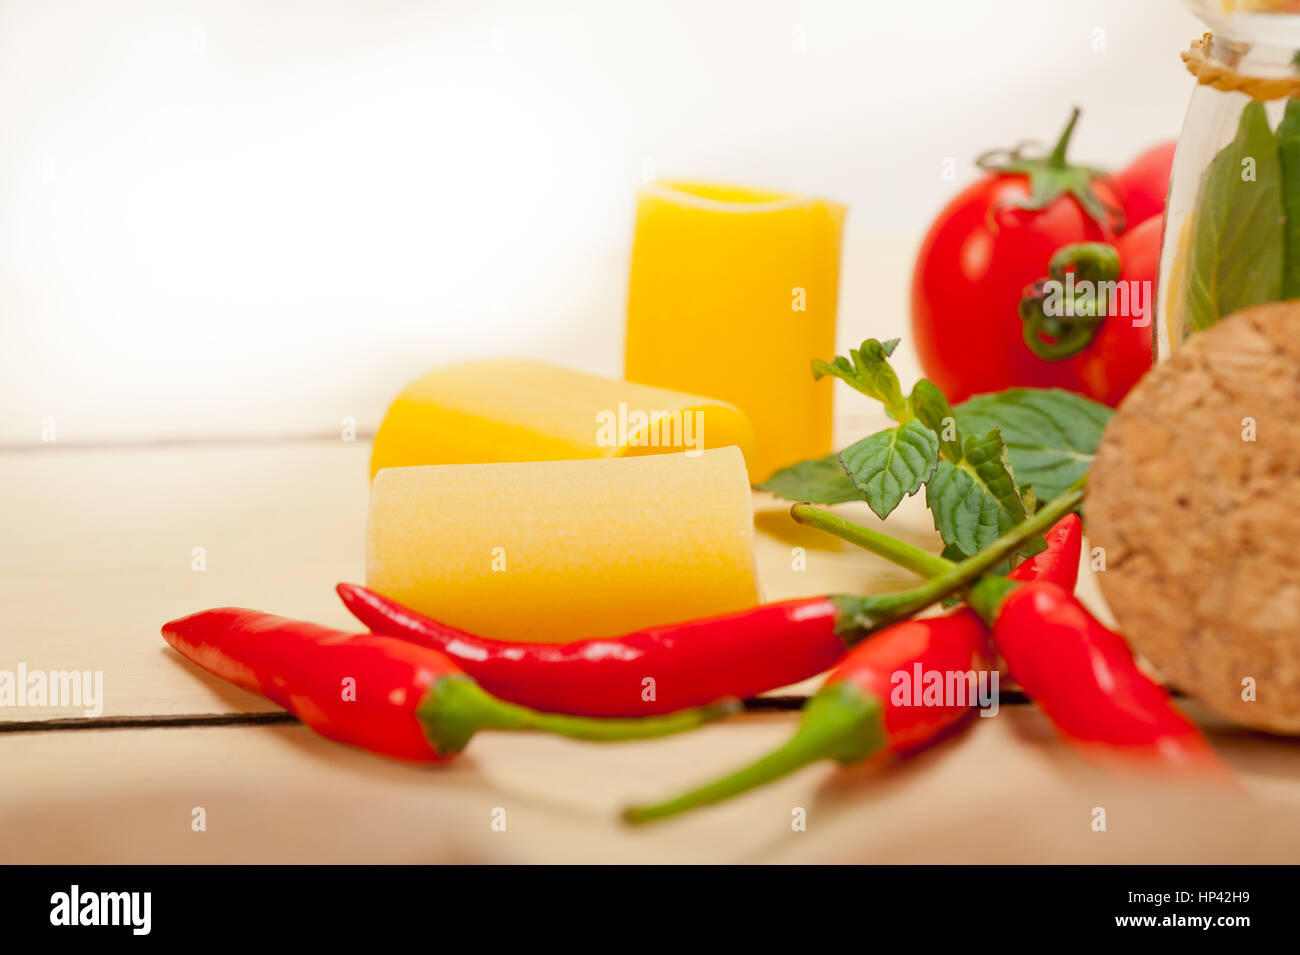 Italian pasta paccheri or schiaffoni with tomato mint and chili pepper ingredients Stock Photo